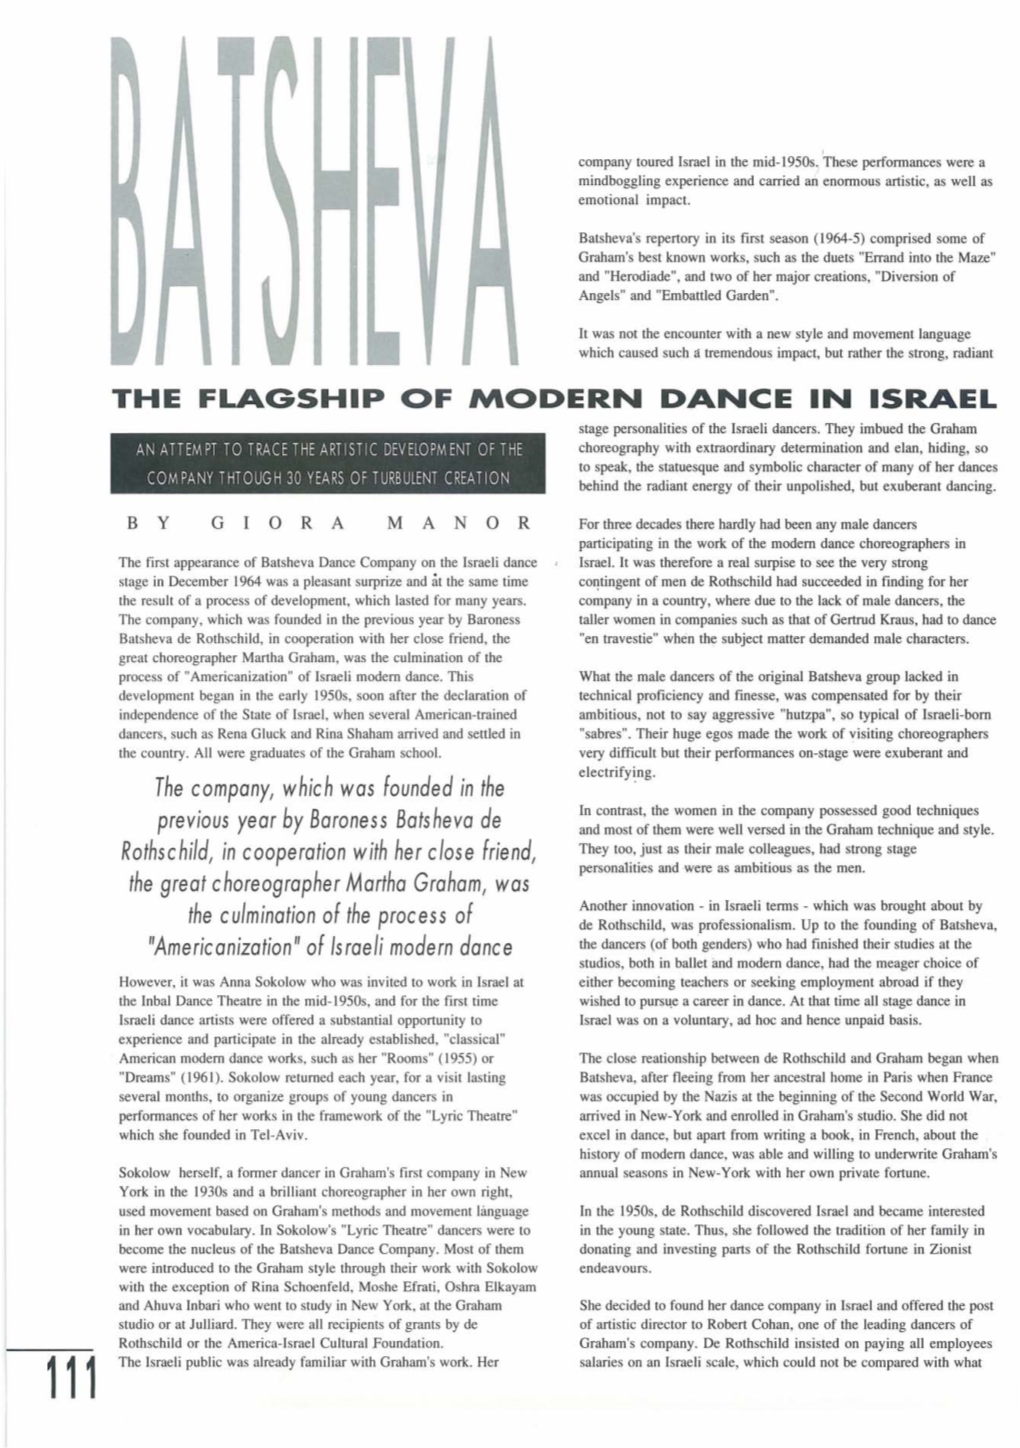 THE FLAGSHIP of MODERN DANCE in ISRAEL the Companyi Which